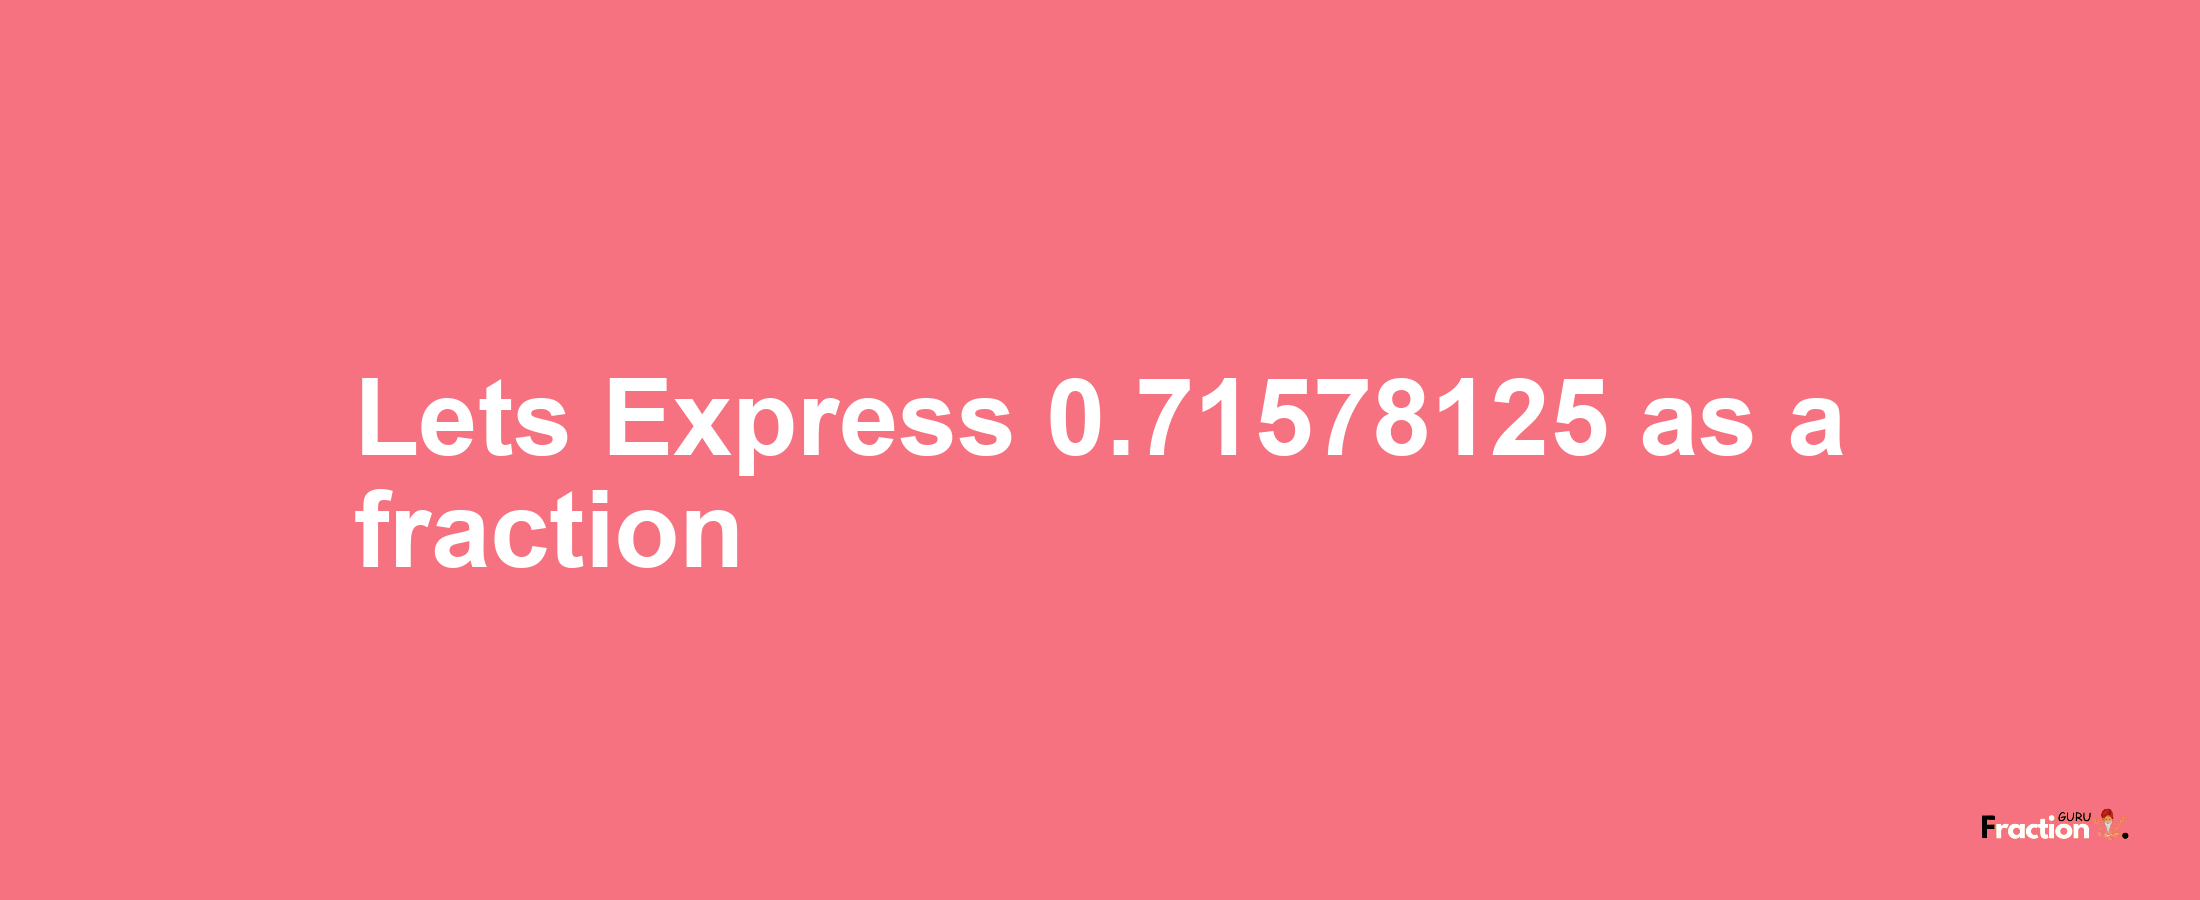 Lets Express 0.71578125 as afraction